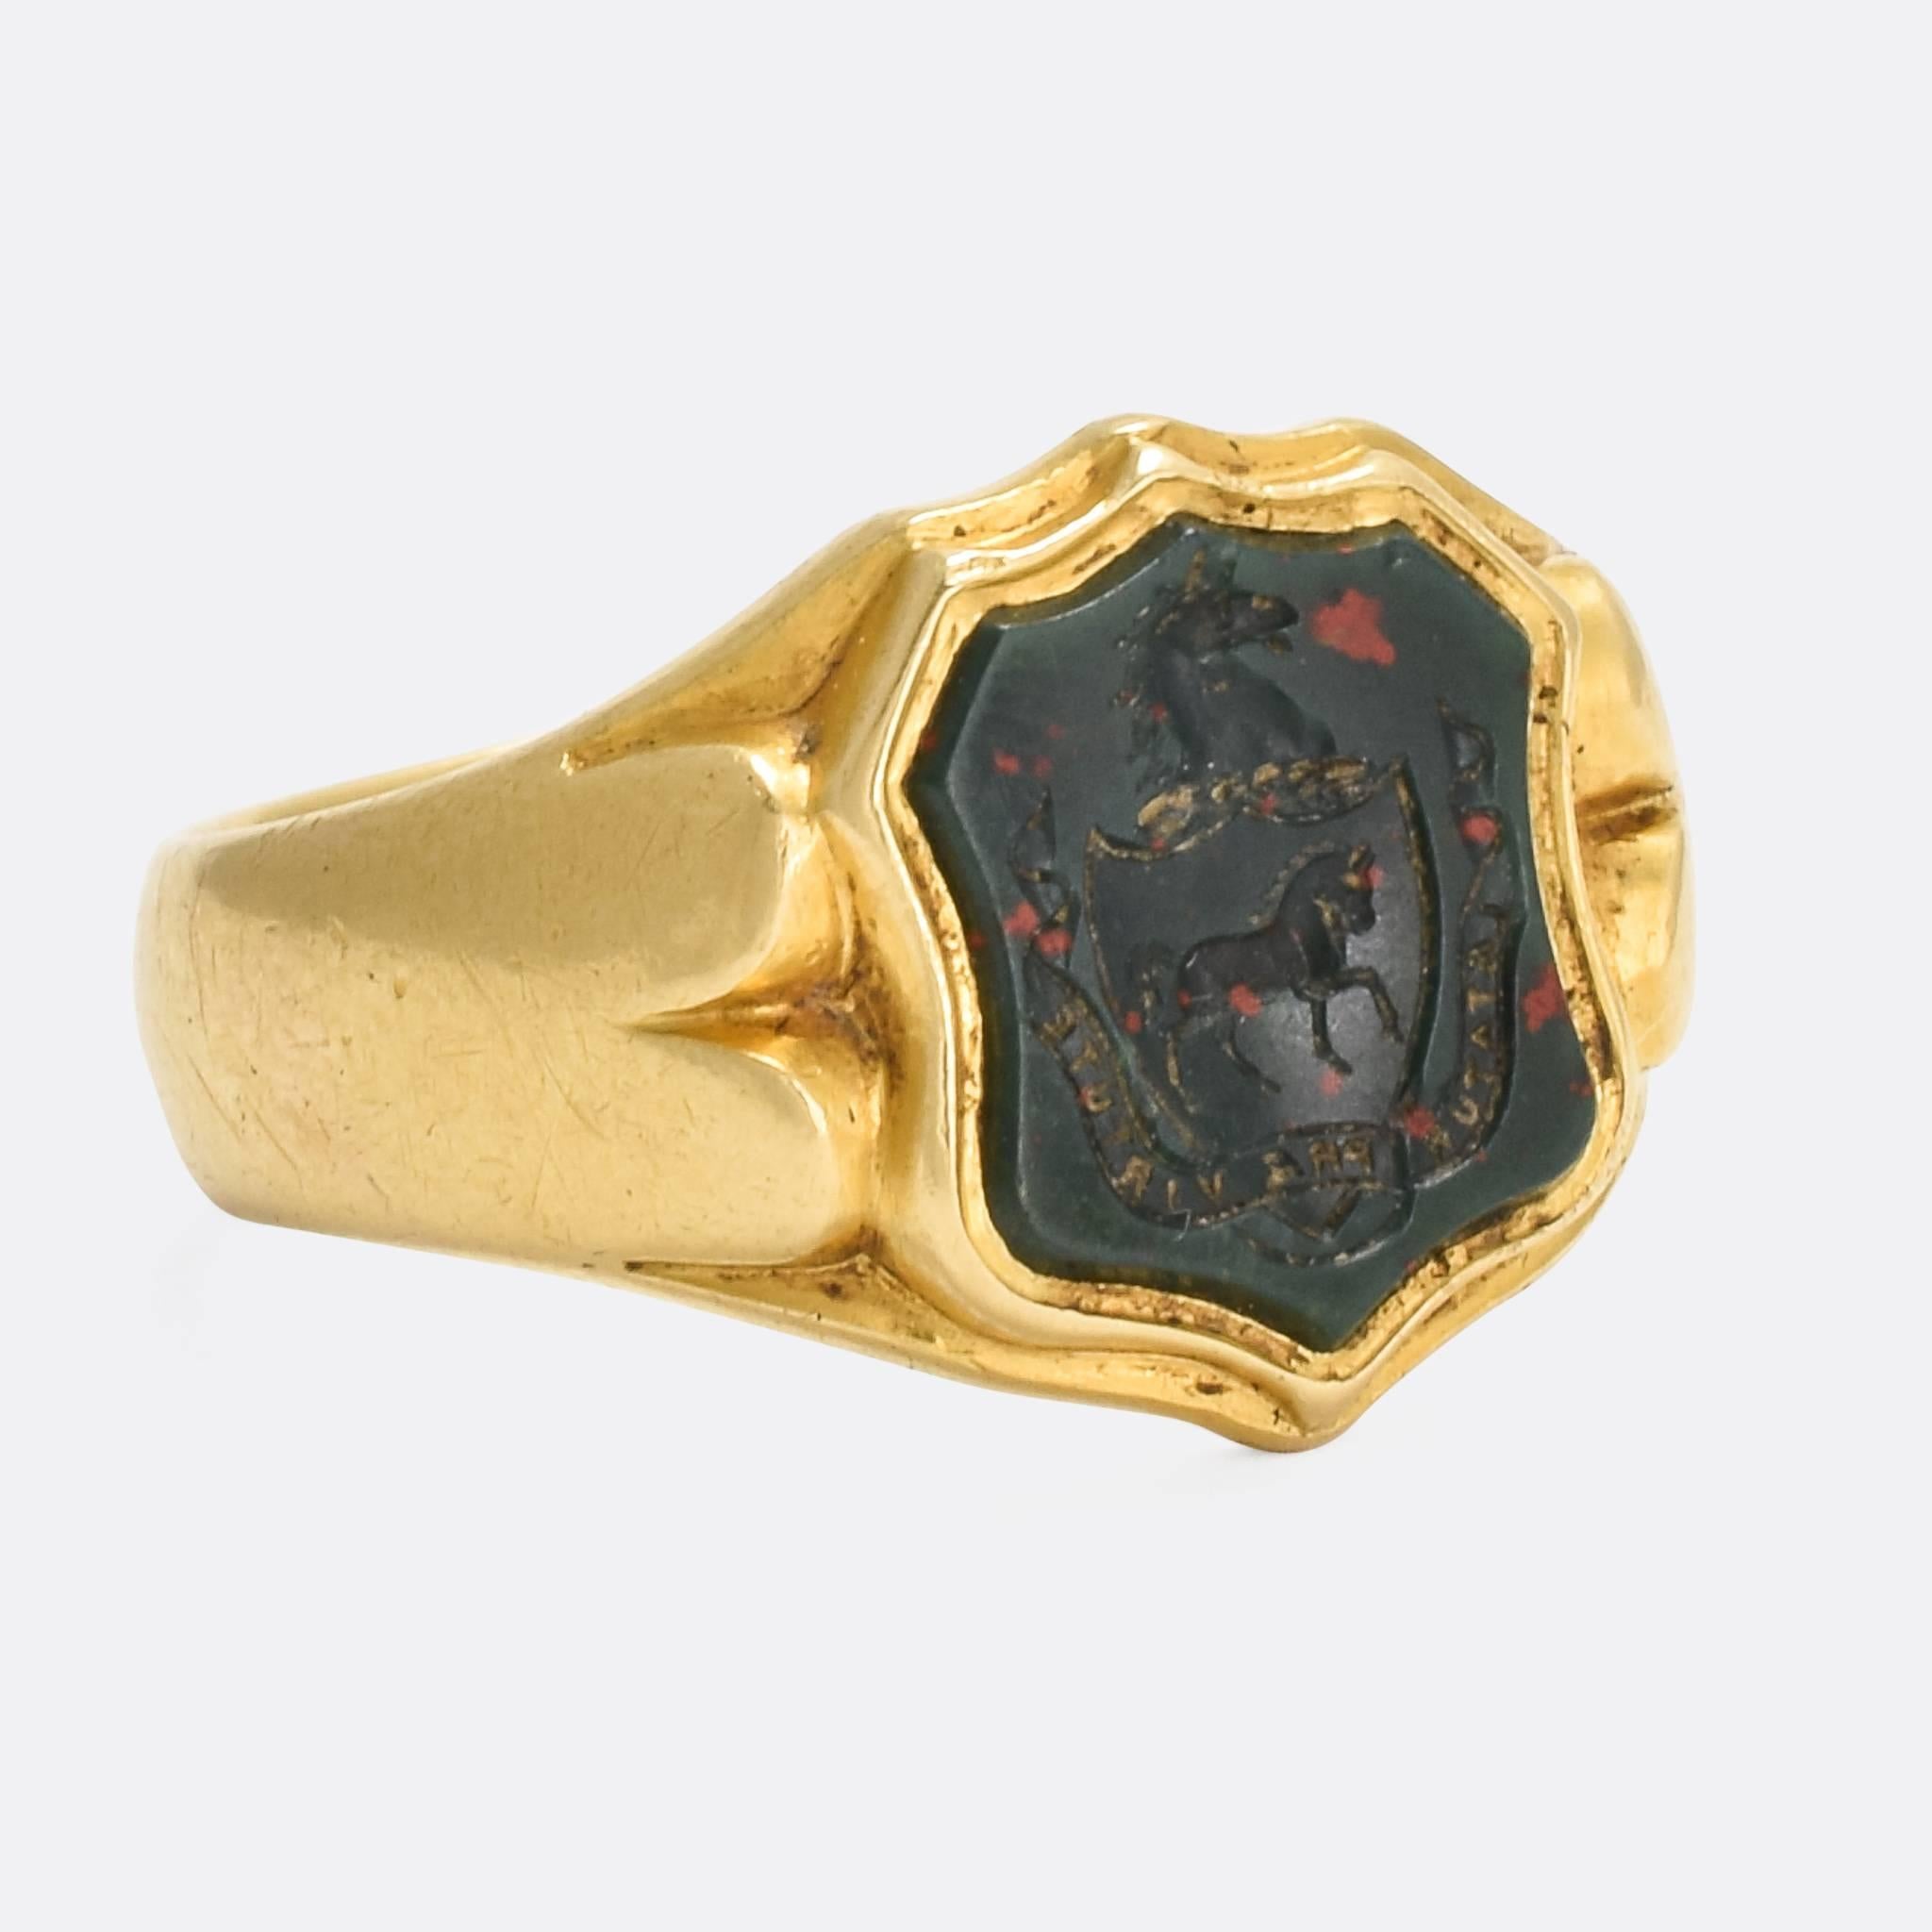 A fine antique signet ring set with a shield-shaped bloodstone panel carved with a heraldic intaglio crest and Latin motto. The motto reads 